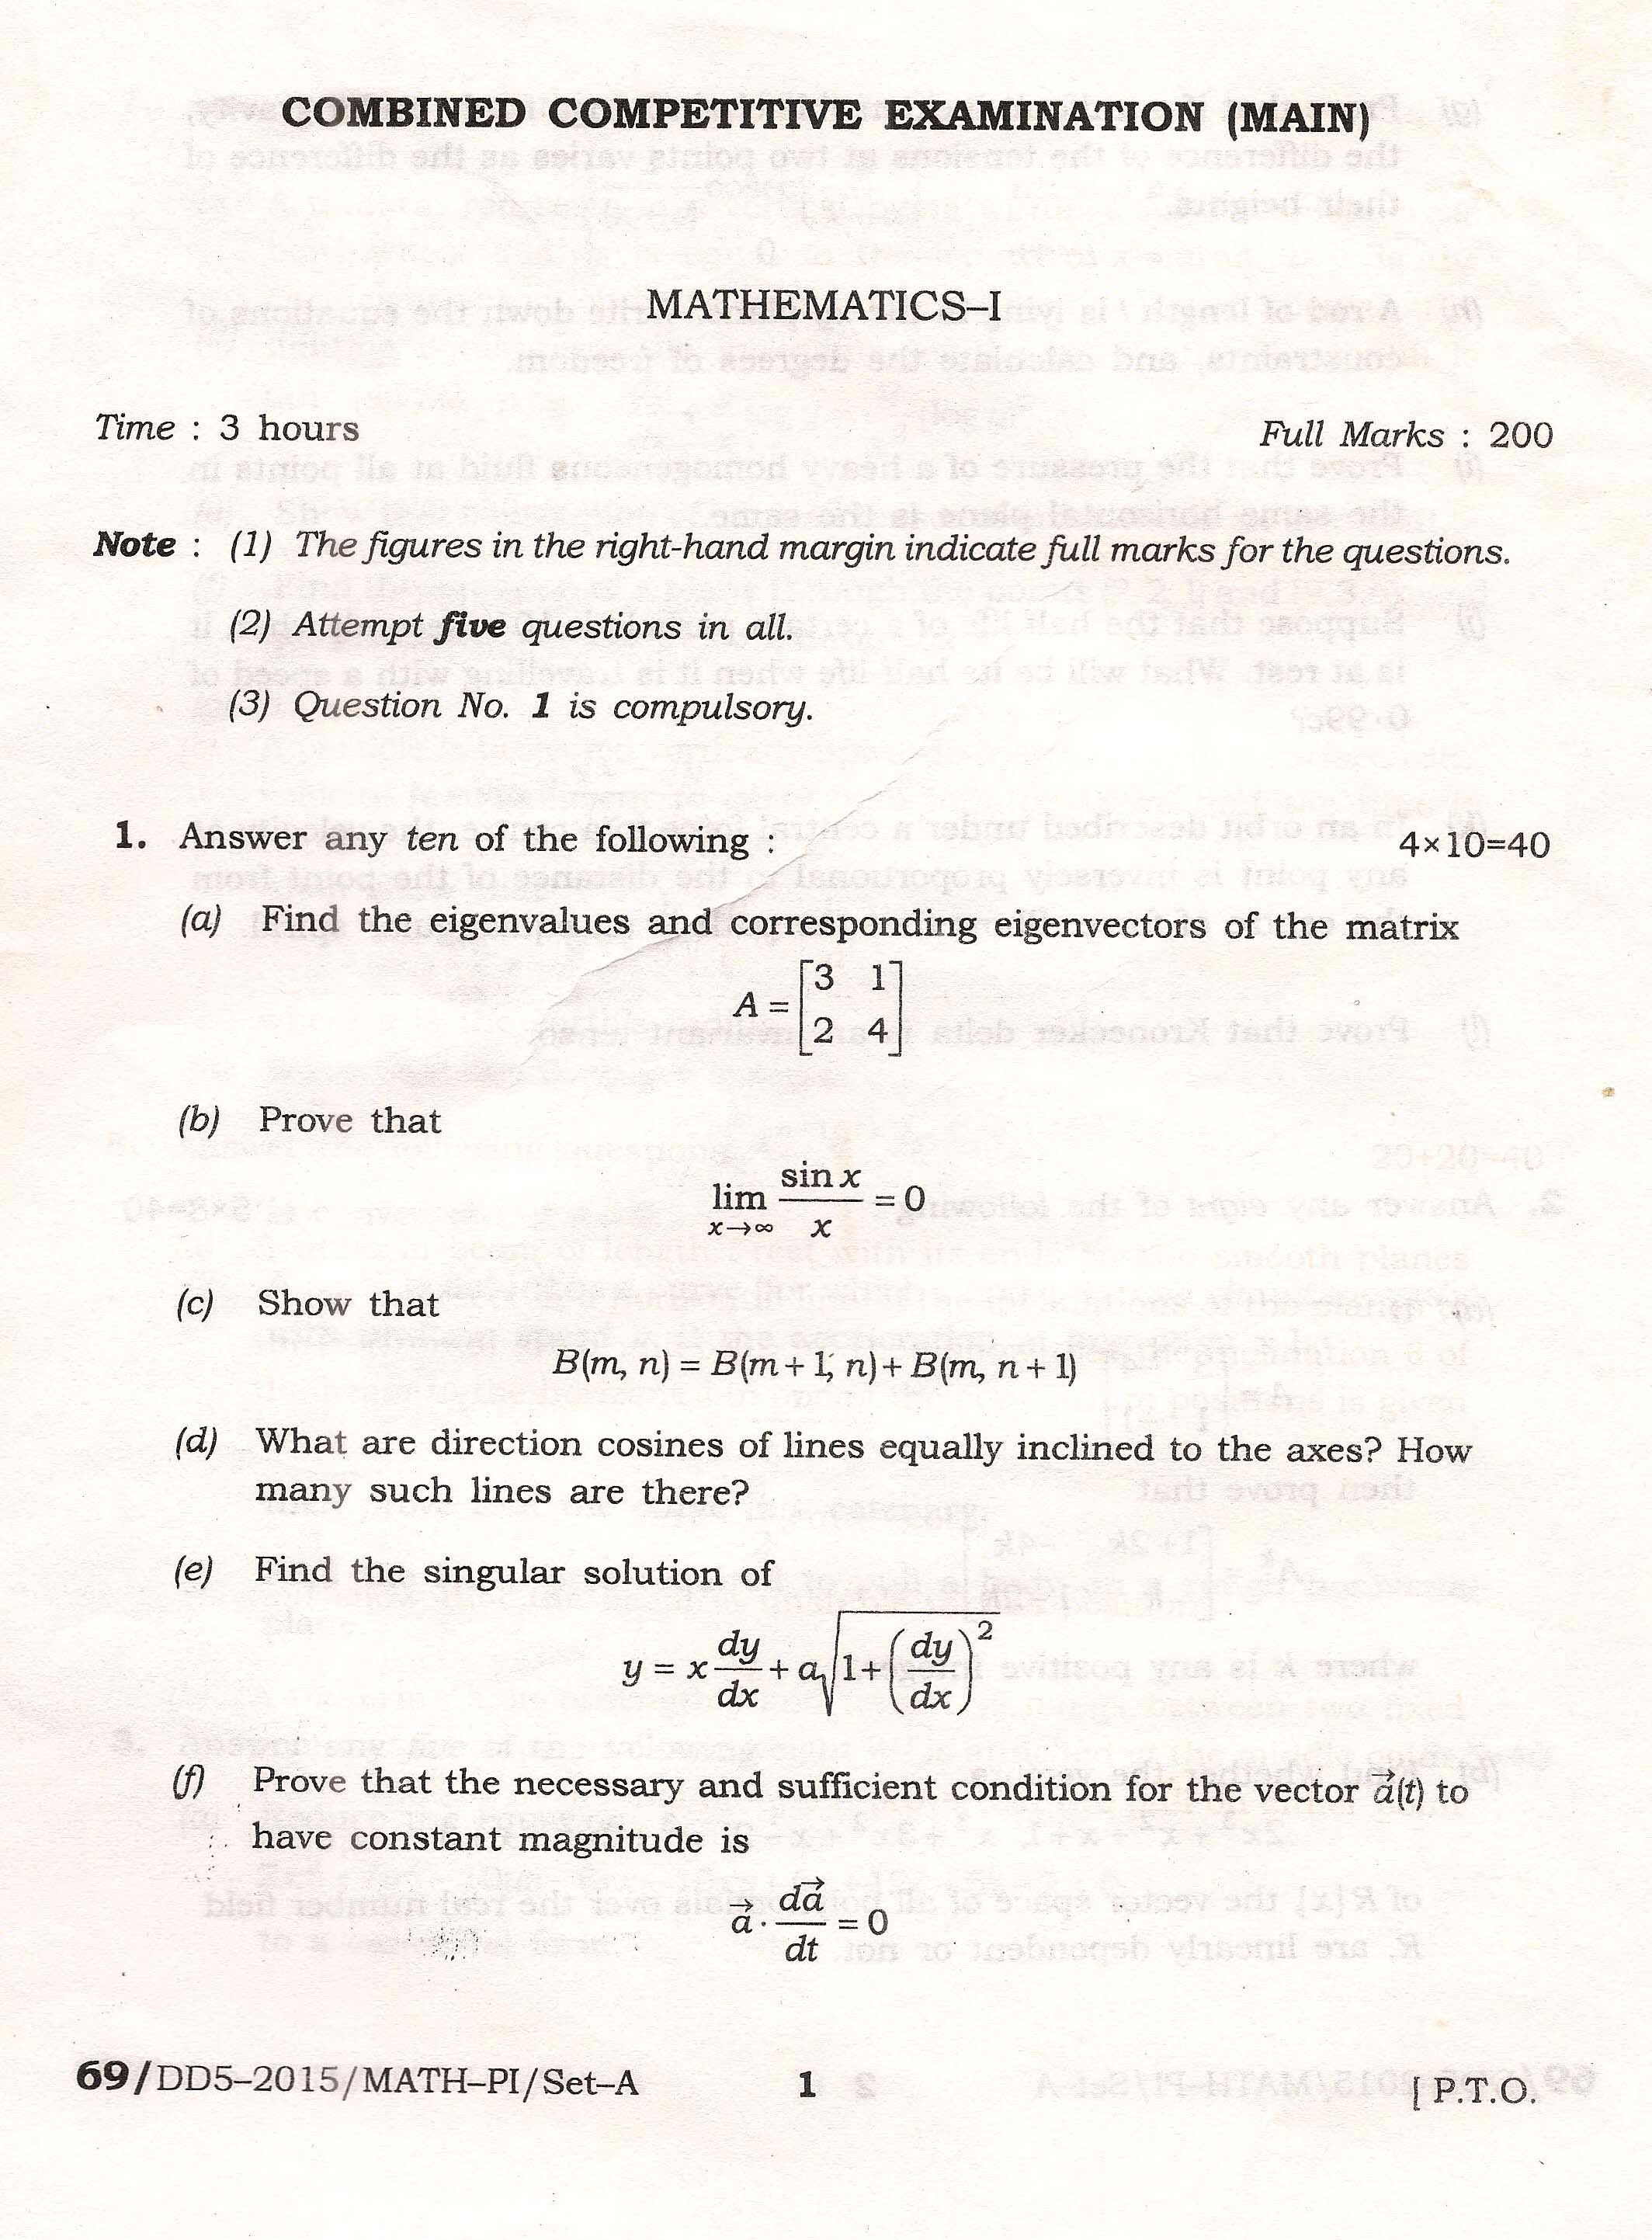 APPSC Combined Competitive Main Exam 2015 Mathematics Paper I 1